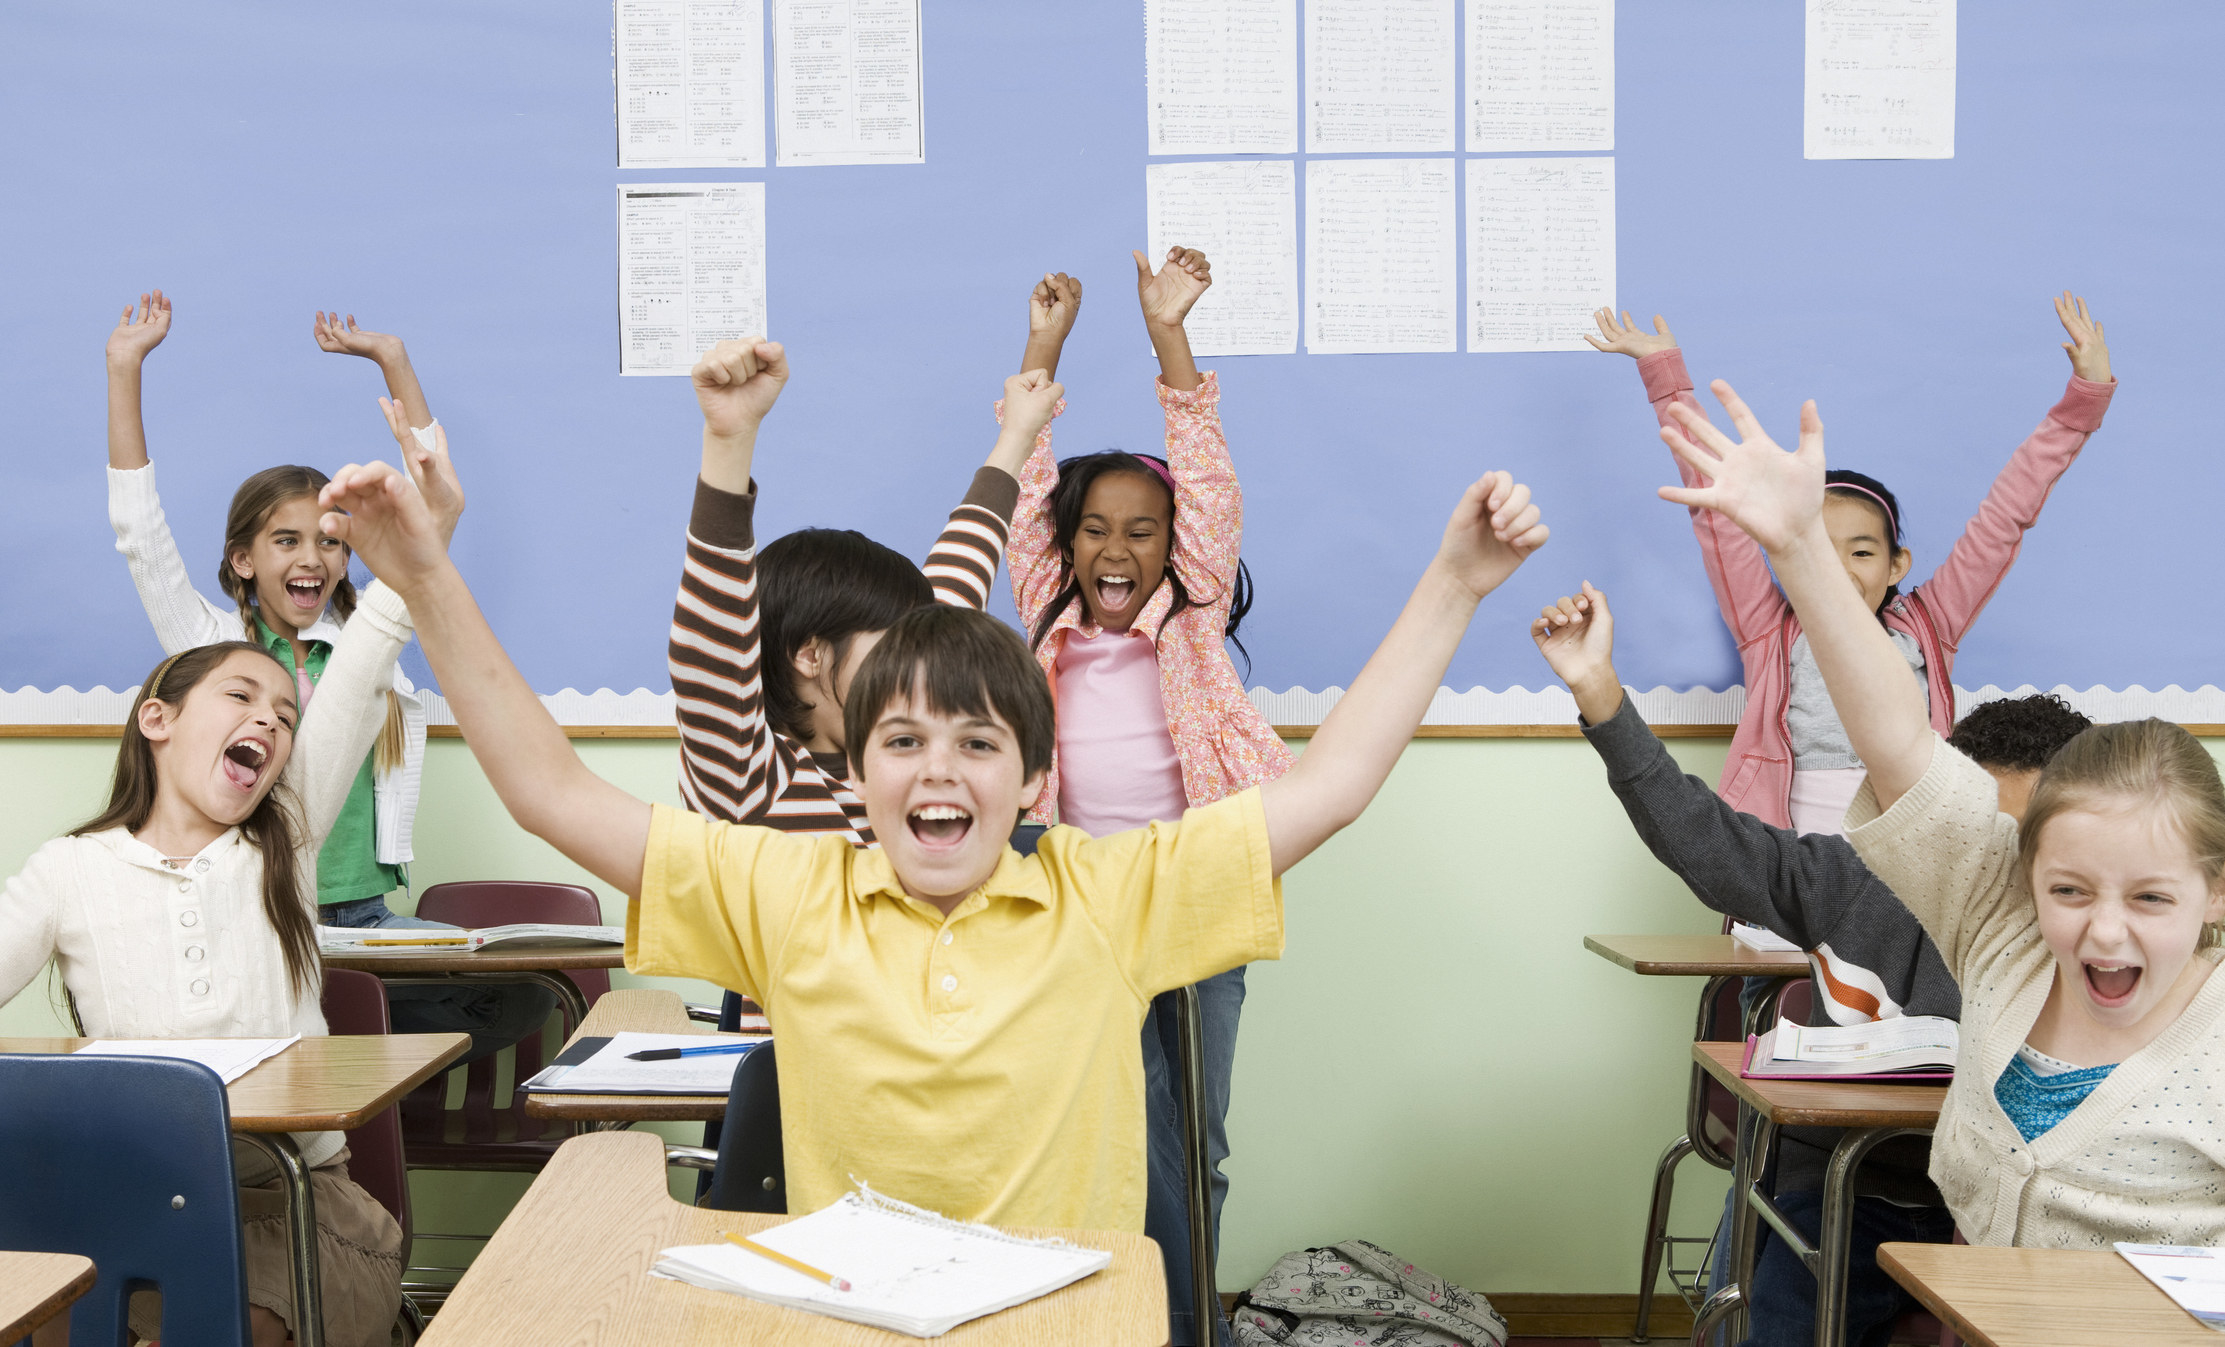 Young students in classroom cheering